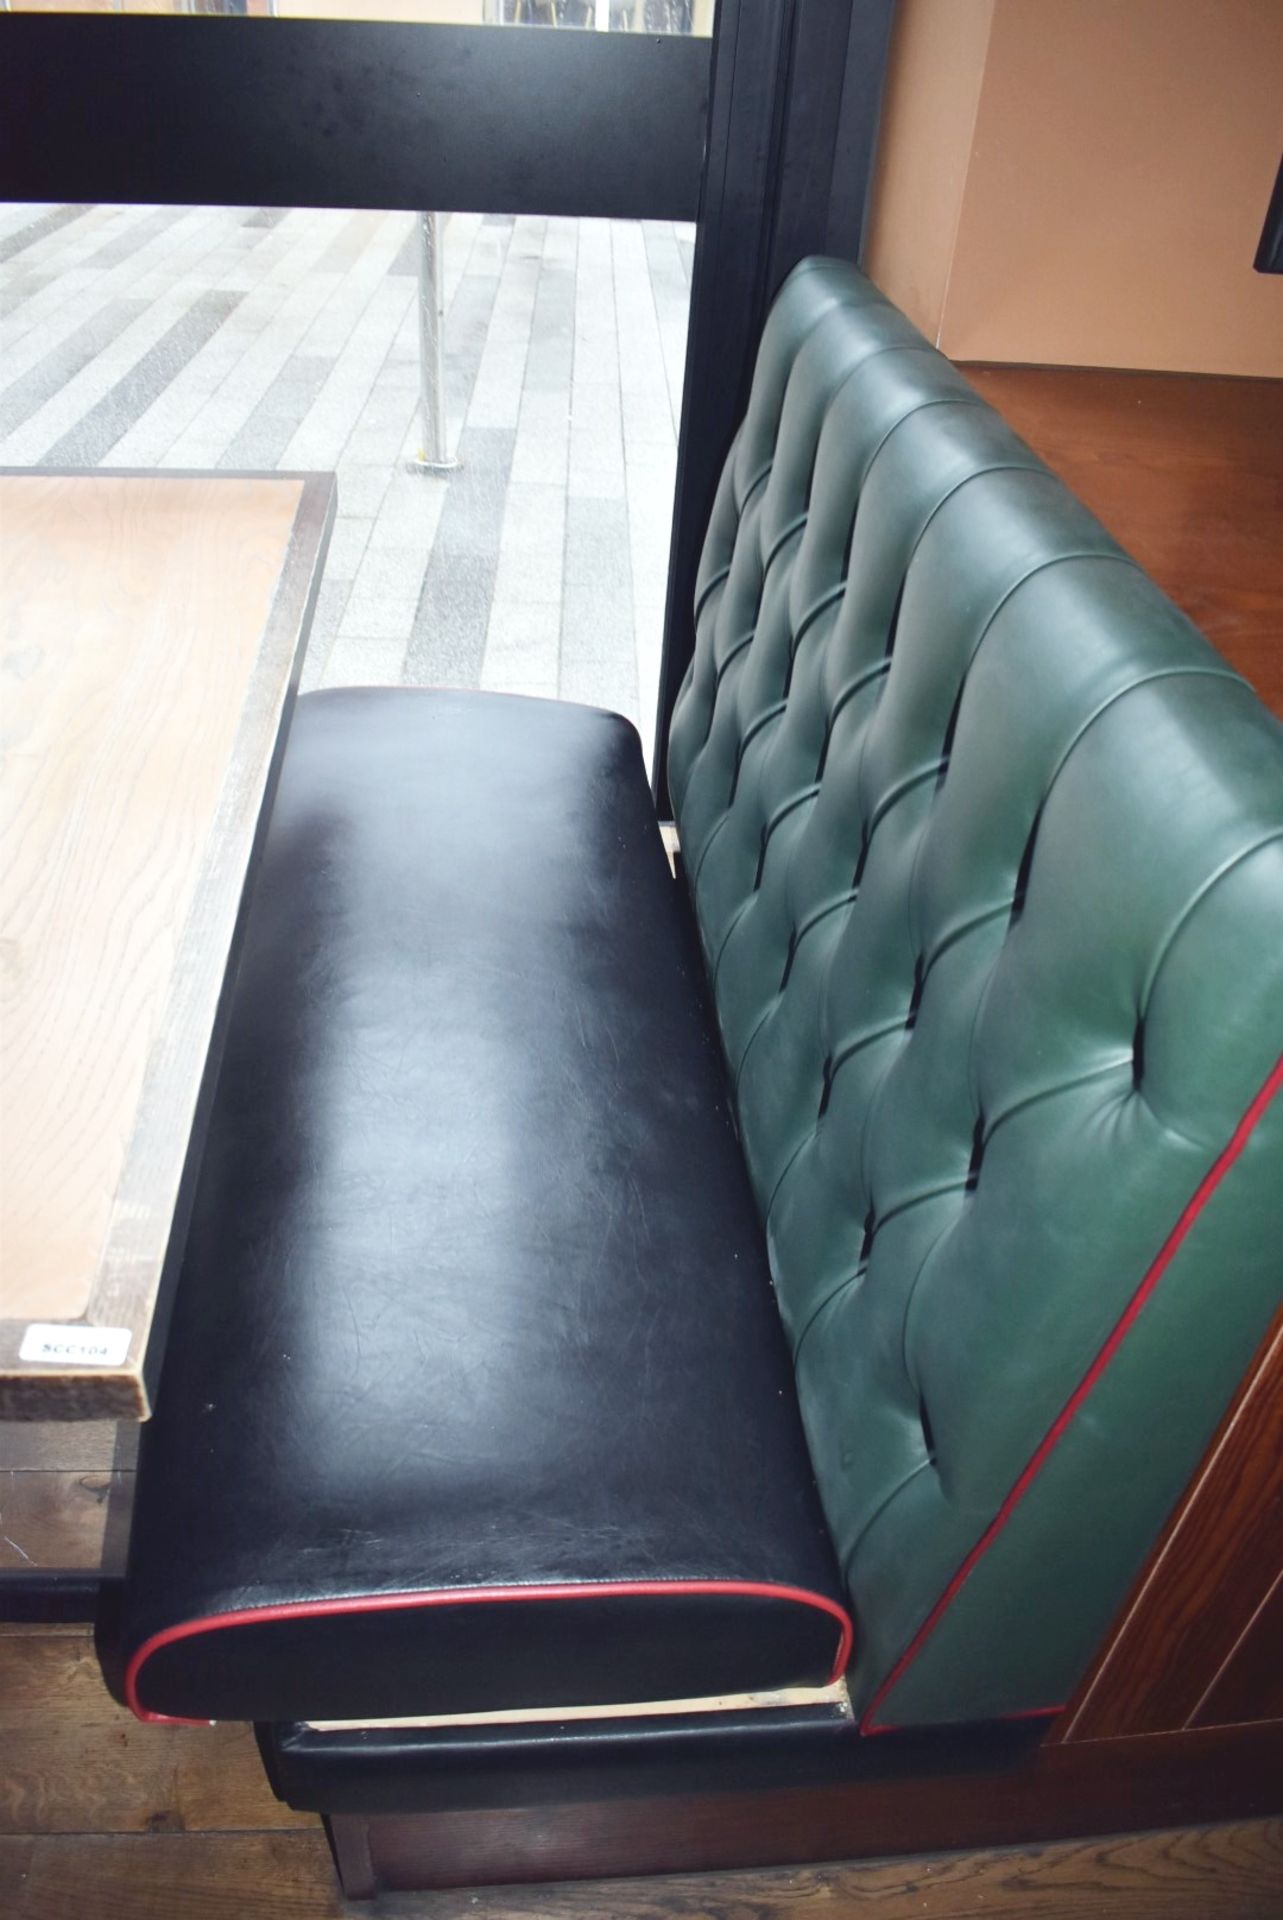 4 x Sections of Restaurant Double Booth Seating - Sits Up to 12 Persons - Green & Black Upholstery - Image 16 of 24